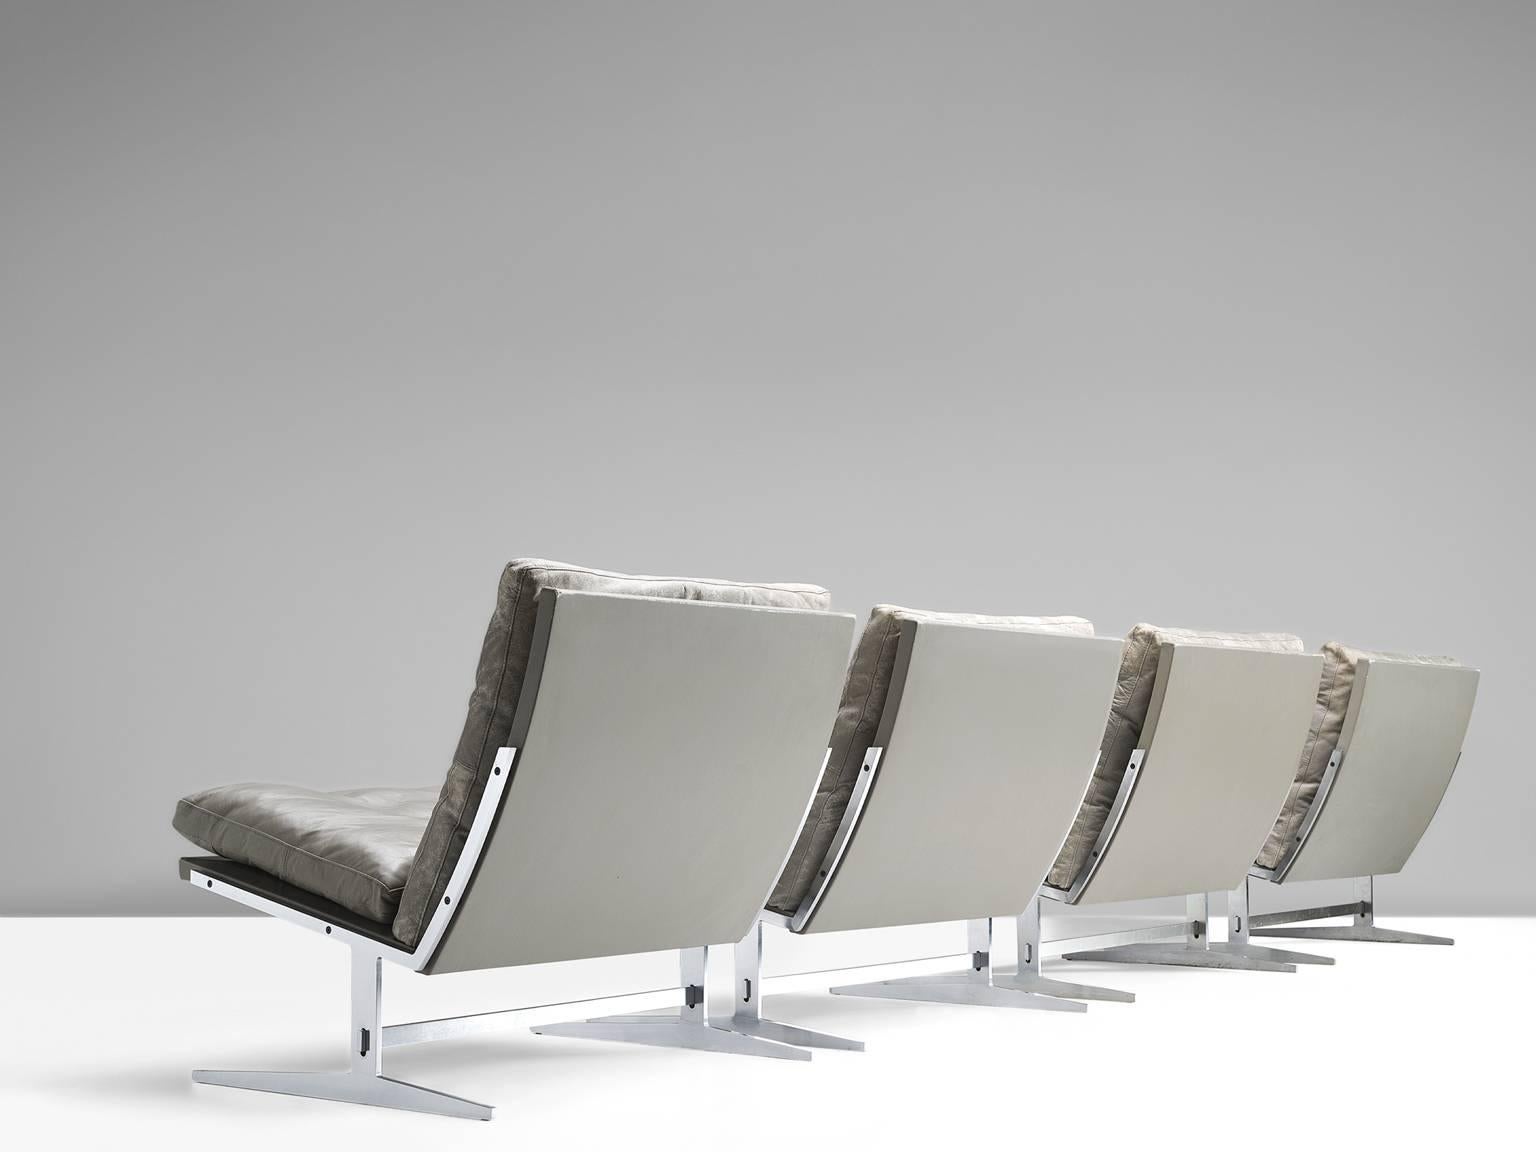 Four lounge chairs model BO561, in brushed steel and grey leather, by Preben Fabricius & Jørgen Kastholm, Denmark 1962. 

Set of four modern slipper chairs in steel and leather. These chairs hold an L-shaped seating. This shape is repeated in